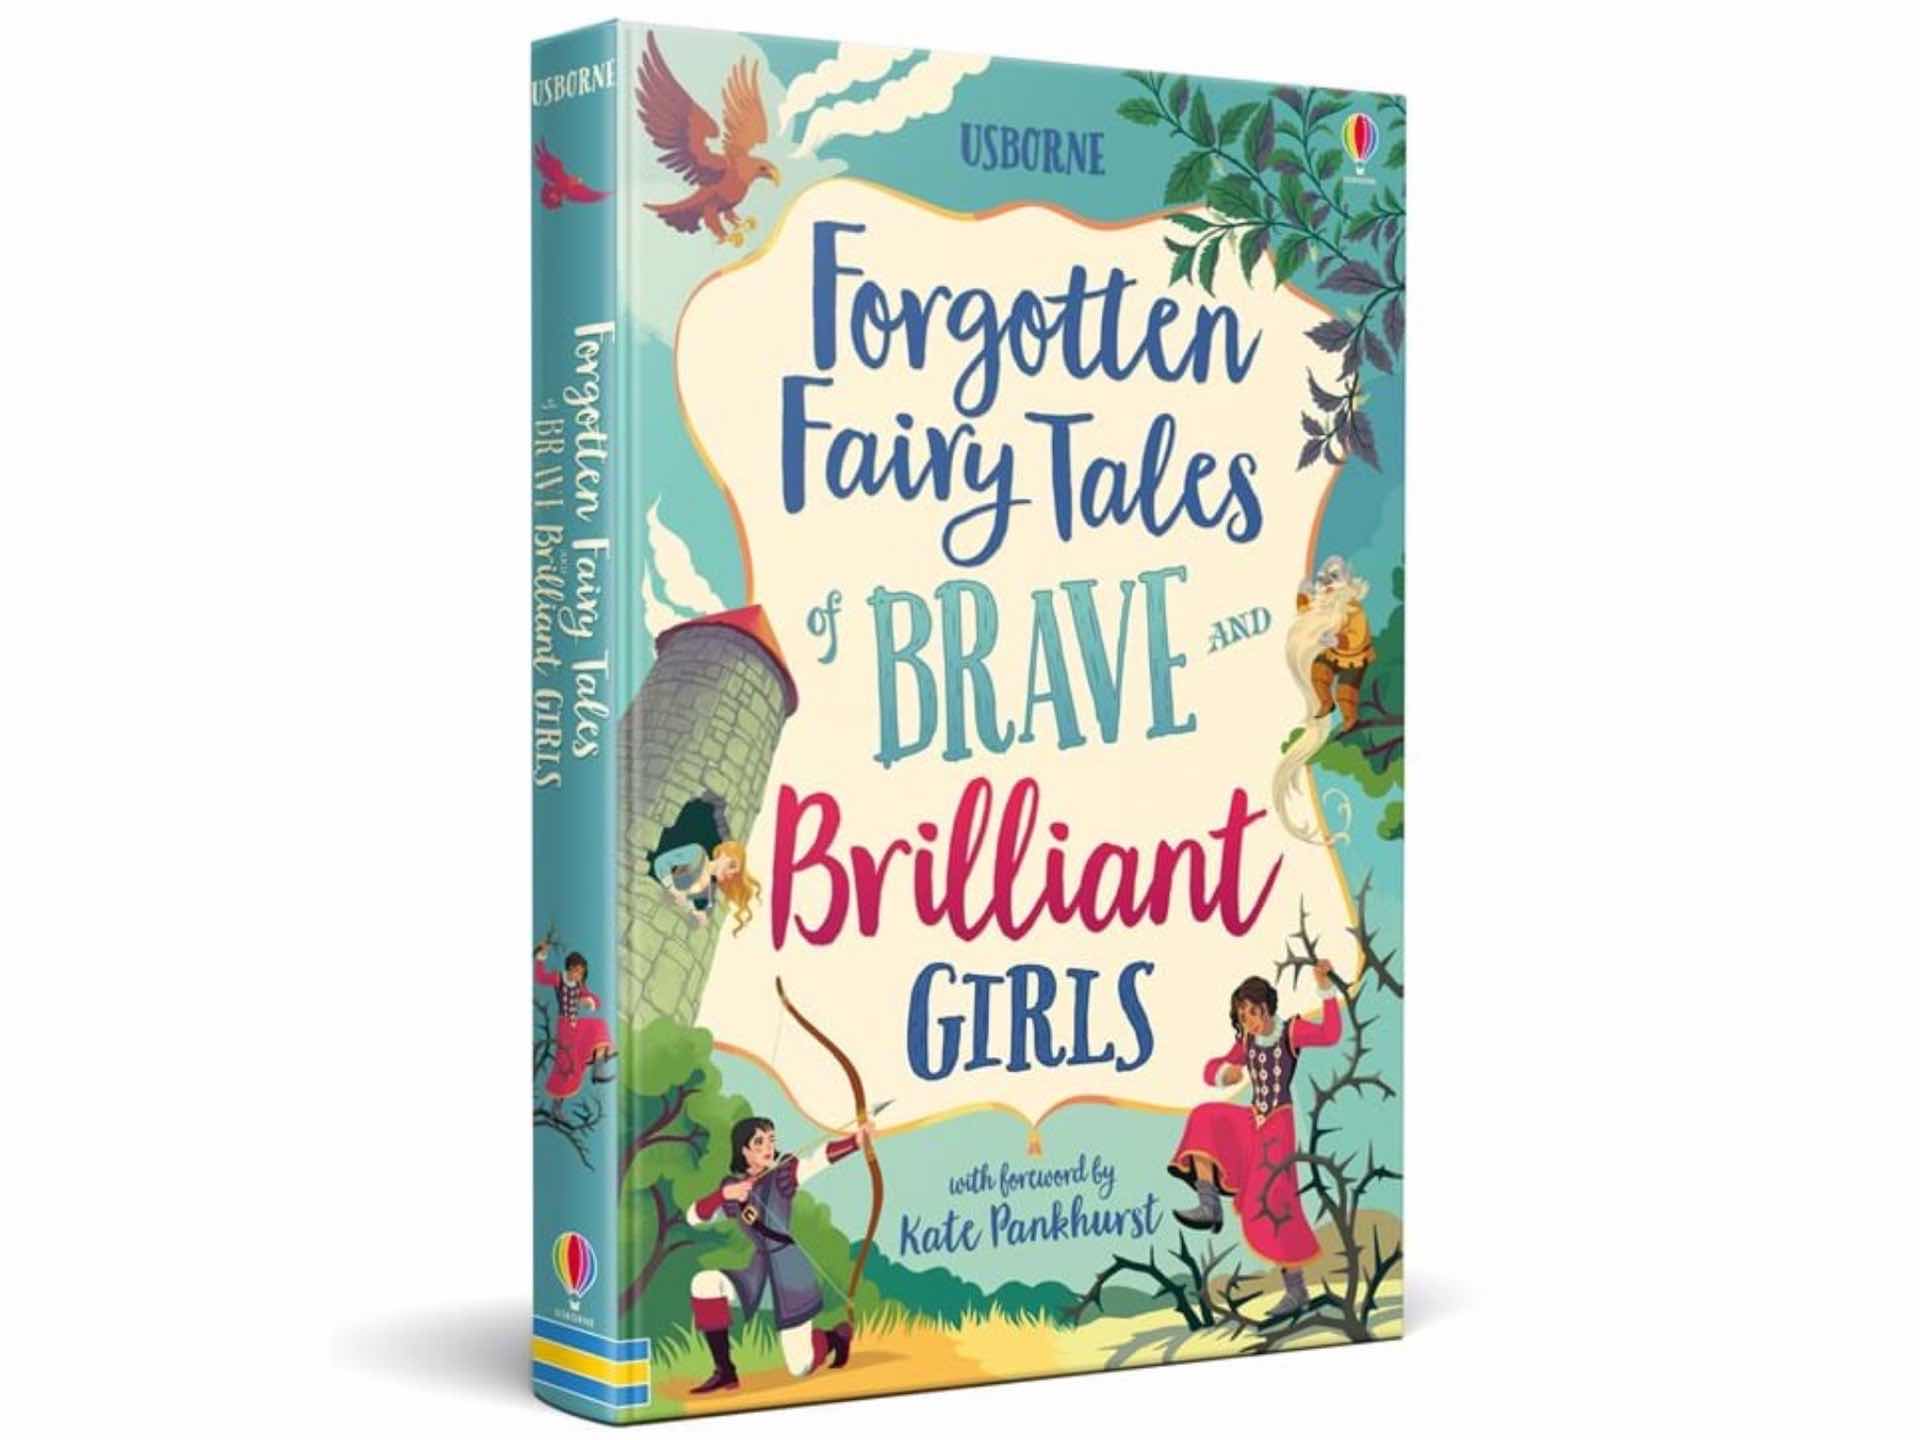 Usborne's Forgotten Fairy Tales of Brave and Brilliant Girls. ($20 hardcover)